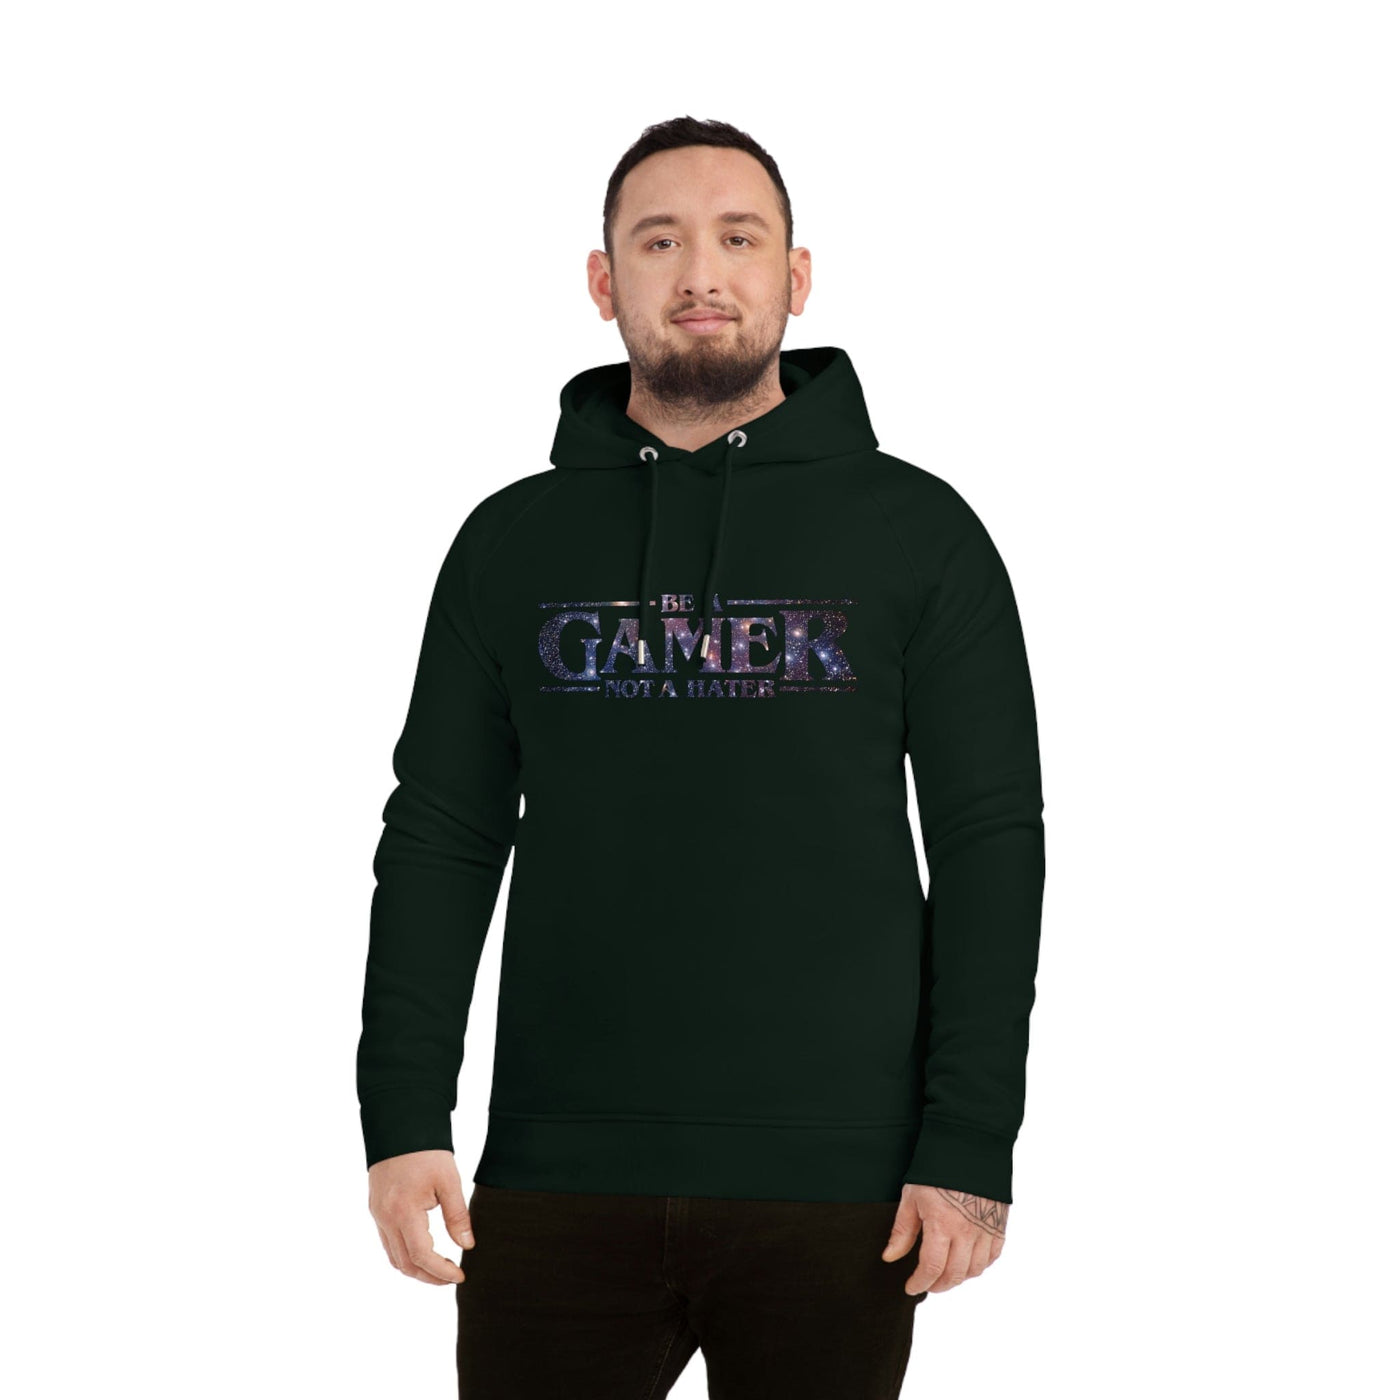 Gamer Fresh Space Age | Be A Gamer | Unisex Sider Hoodie